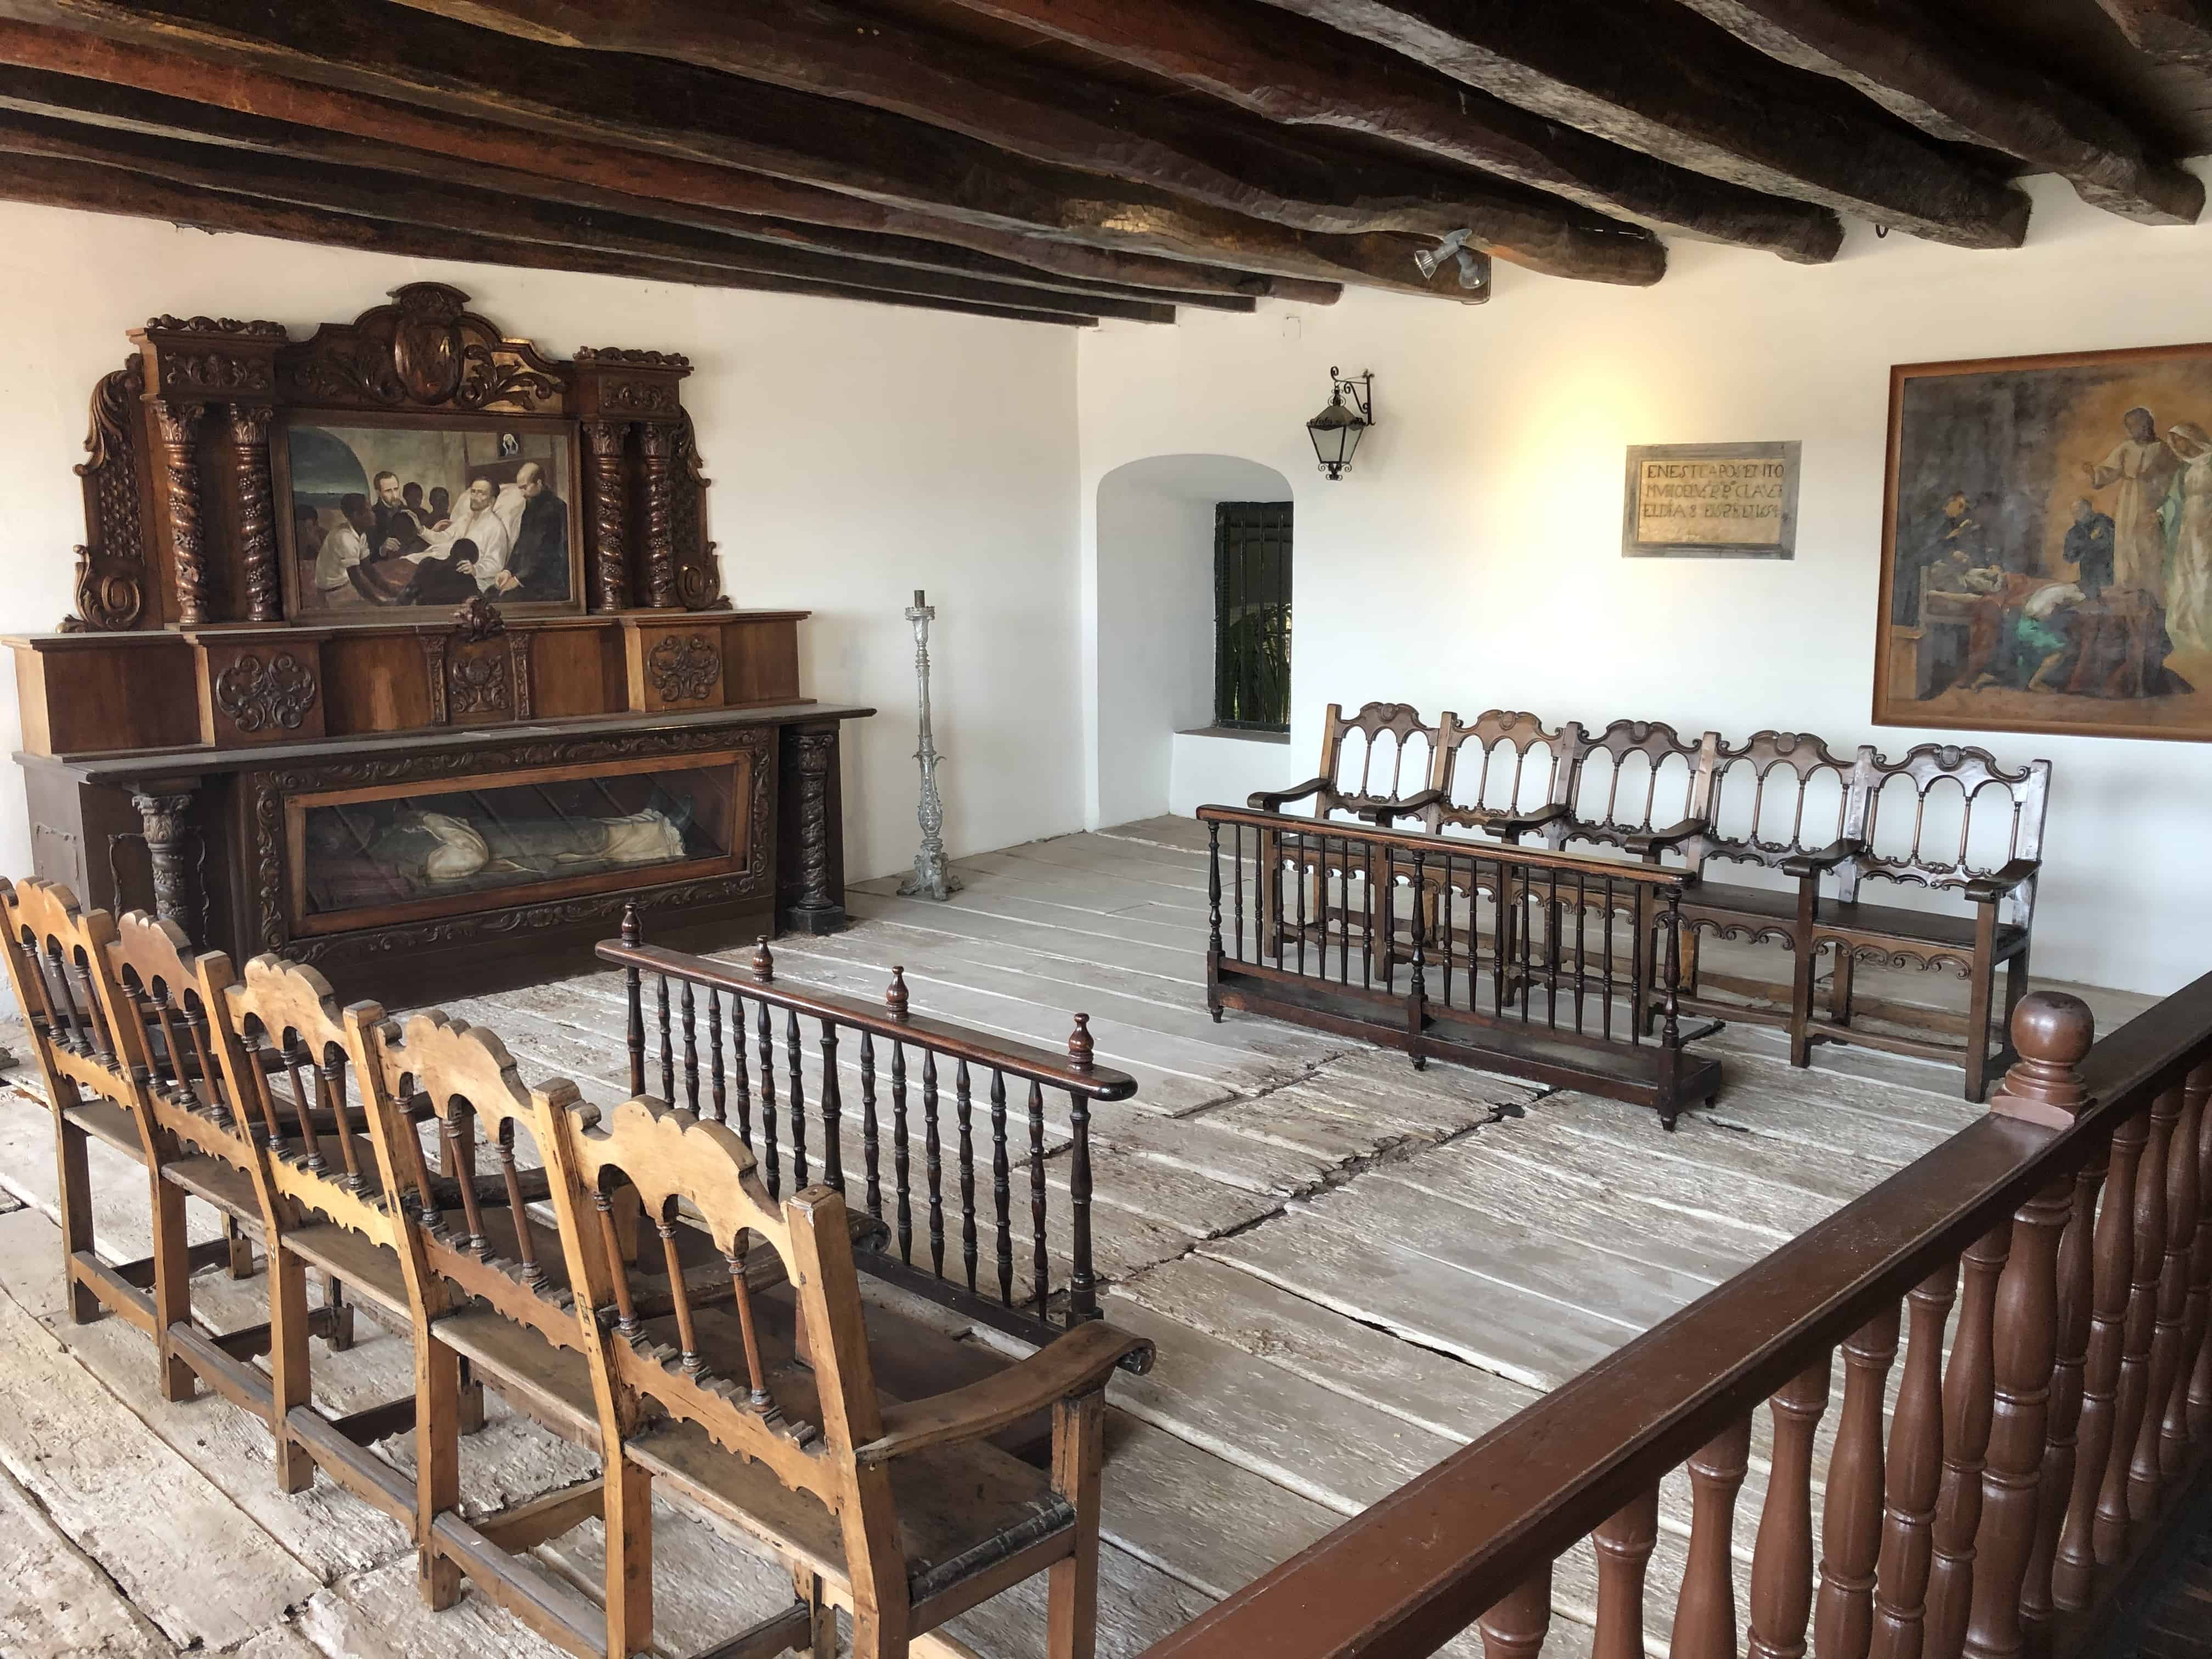 Infirmary where San Pedro Claver died at the Sanctuary of San Pedro Claver Museum in Cartagena, Colombia